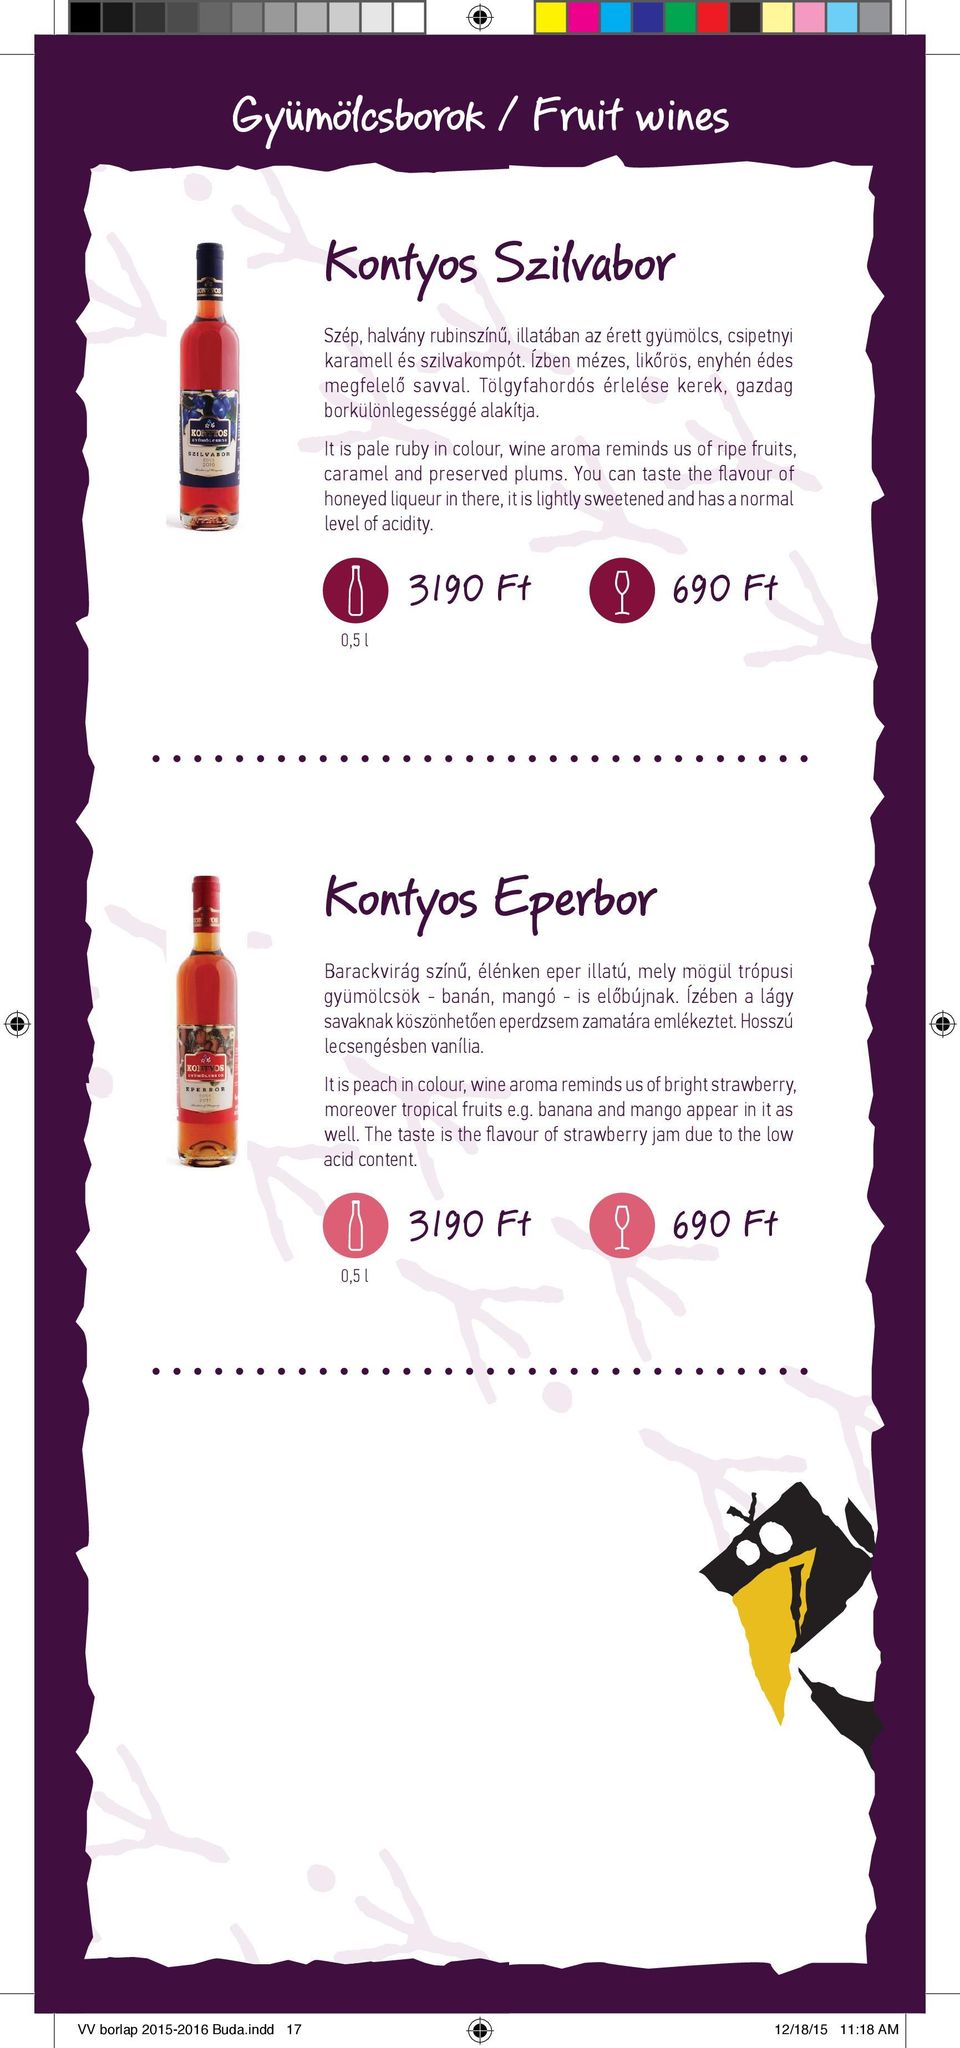 You can taste the fl avour of honeyed liqueur in there, it is lightly sweetened and has a normal level of acidity.